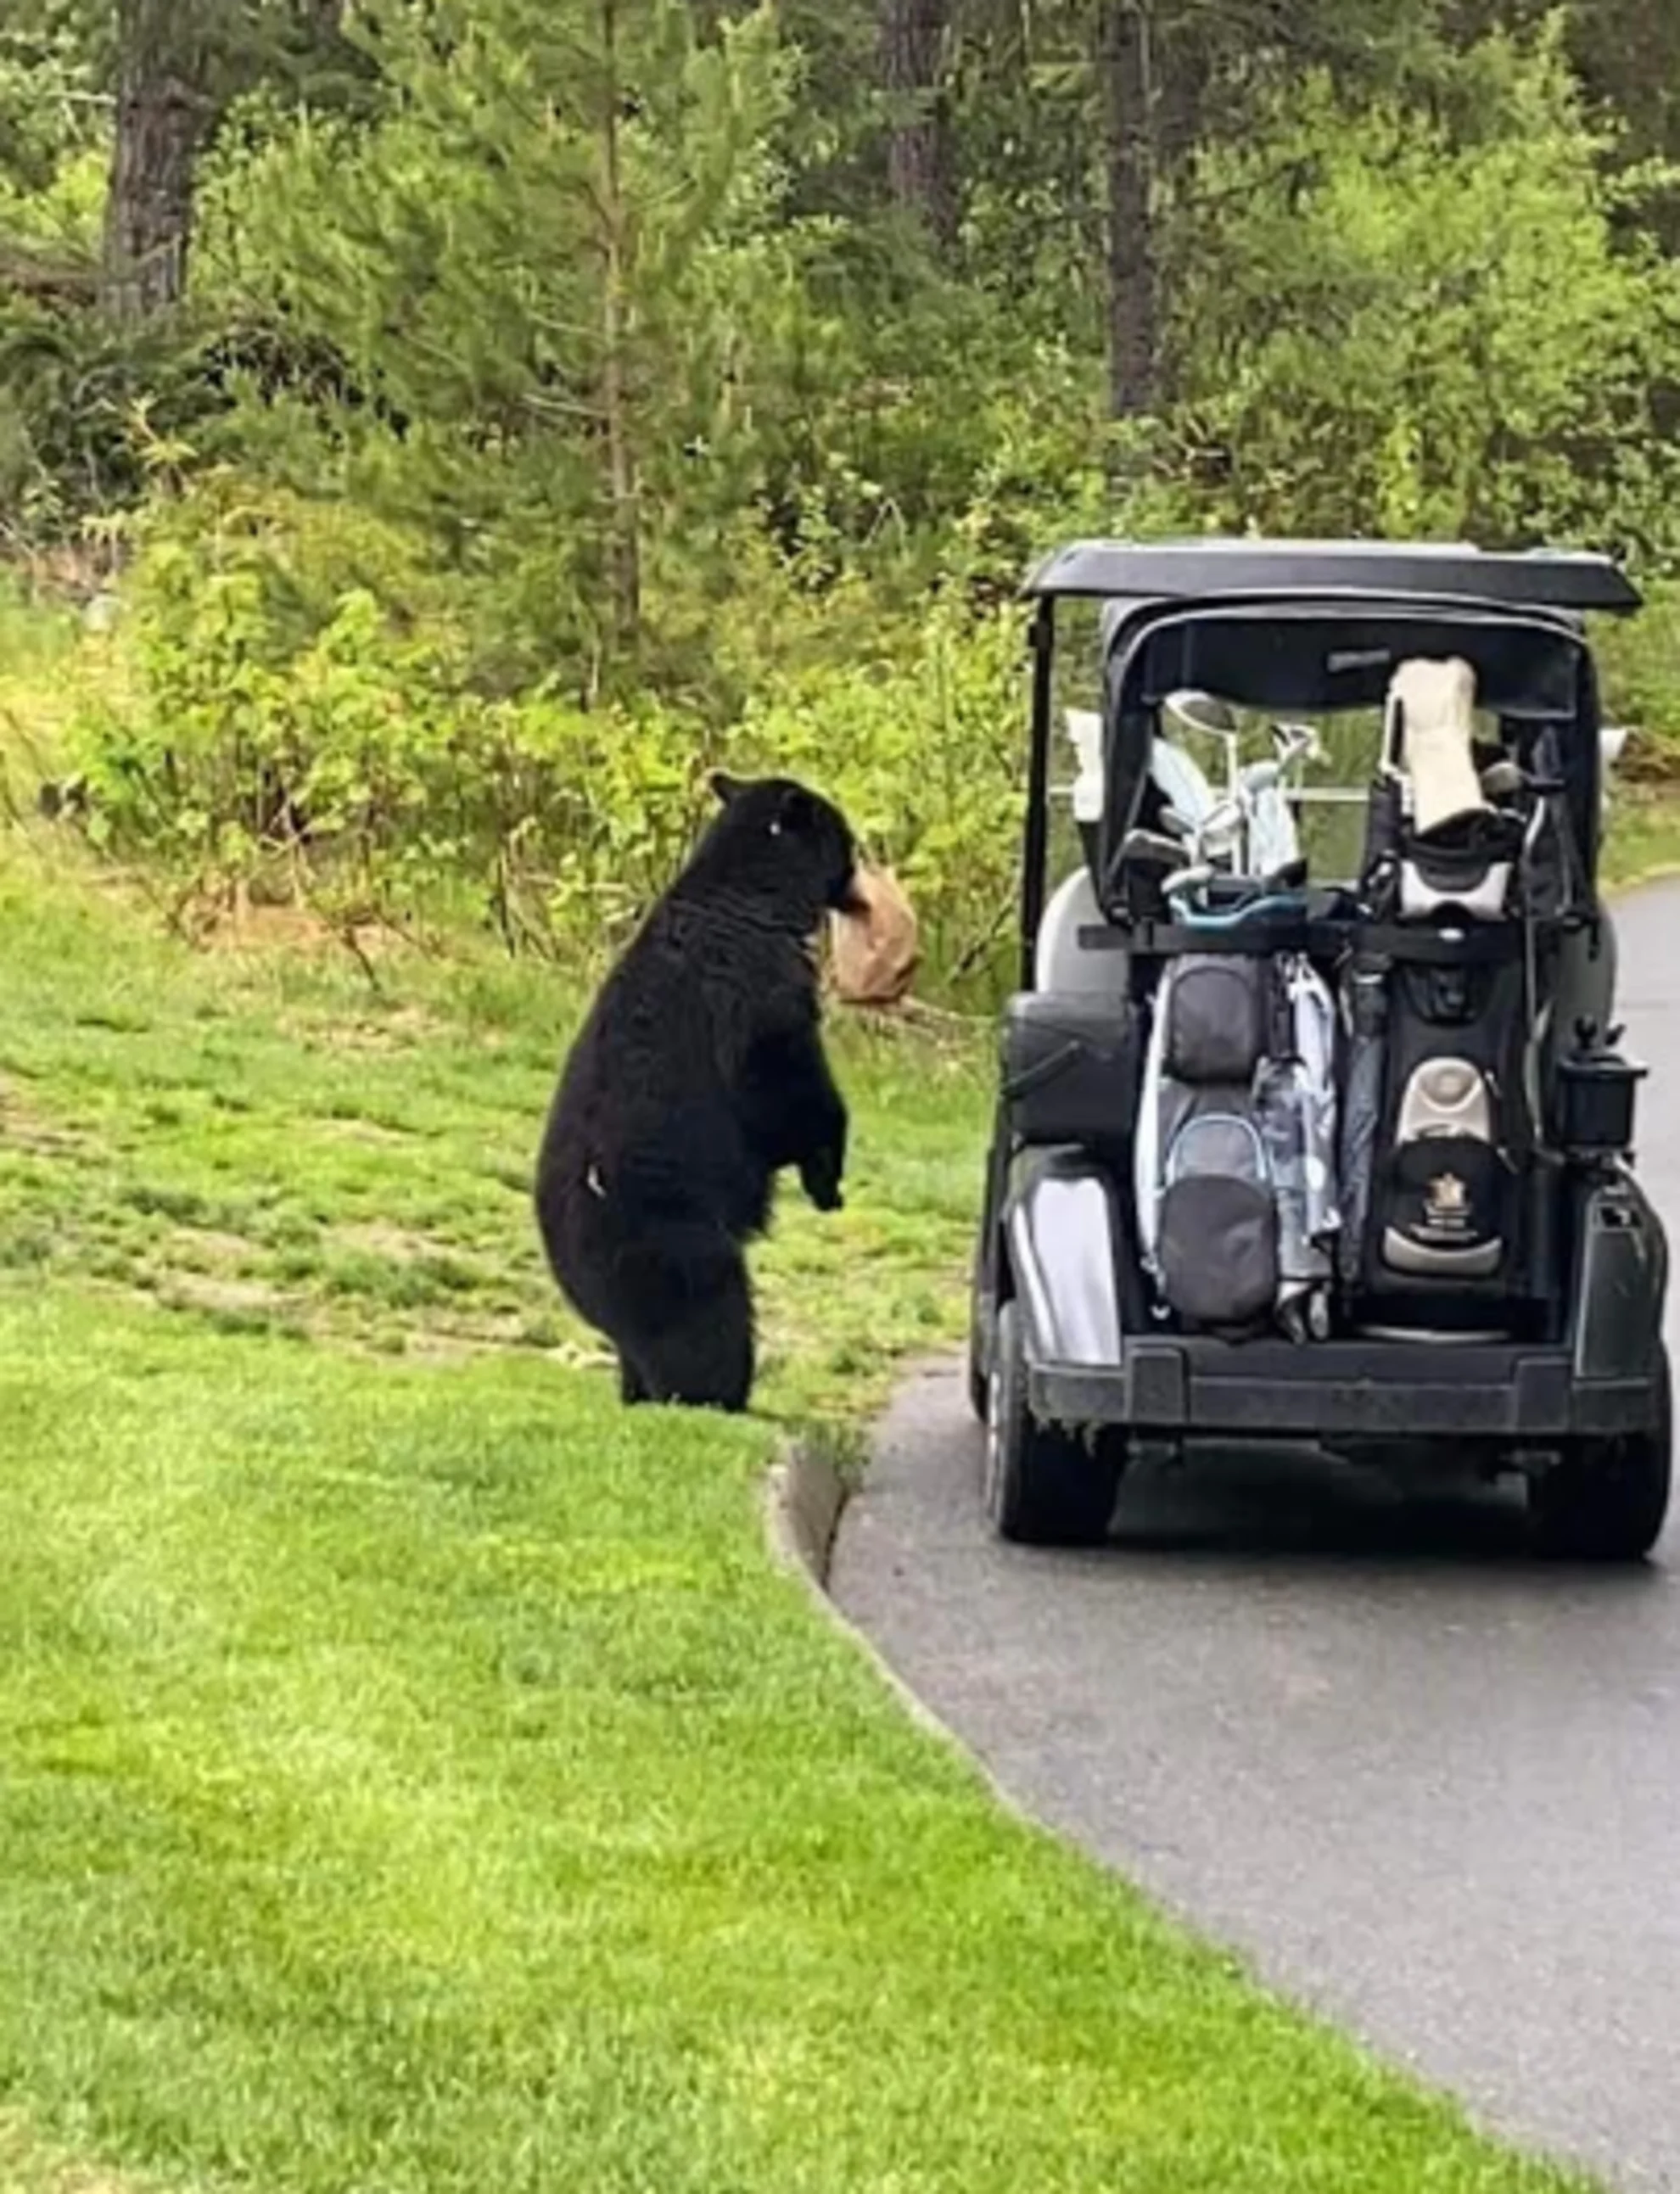 The 'lunch bandit:' B.C. bear swipes snacks right from a golf cart 